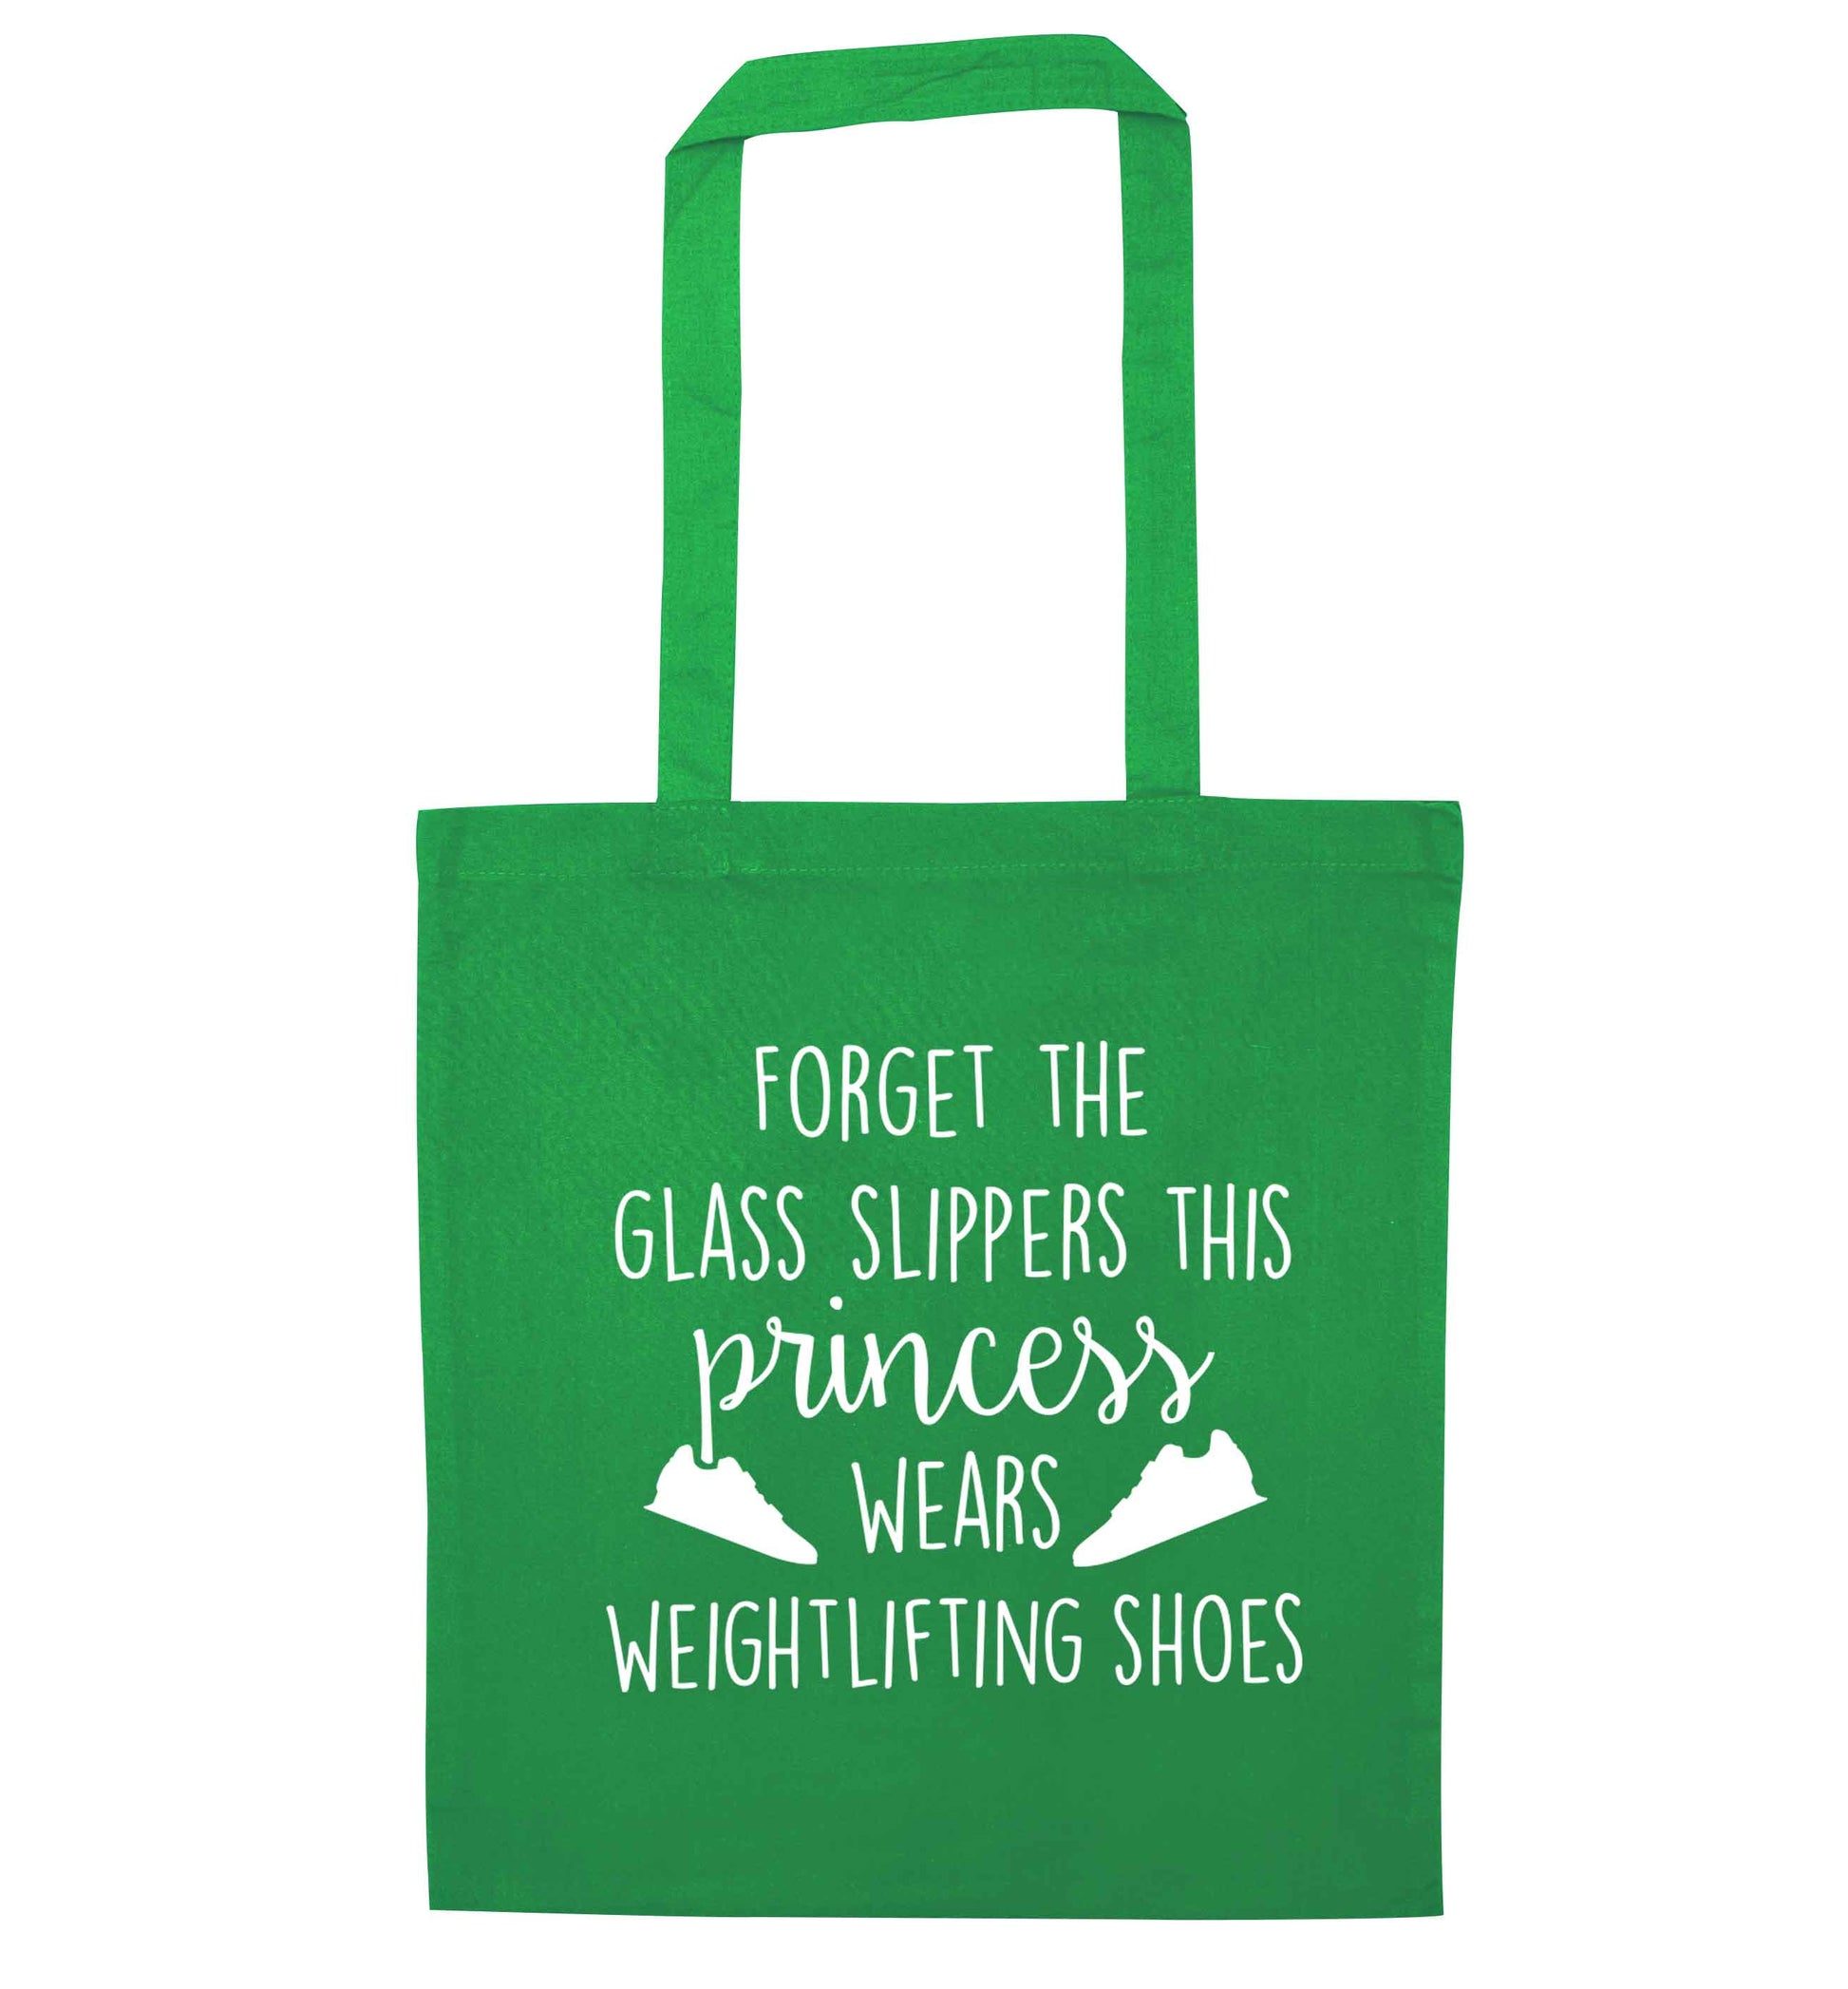 Forget the glass slippers this princess wears weightlifting shoes green tote bag